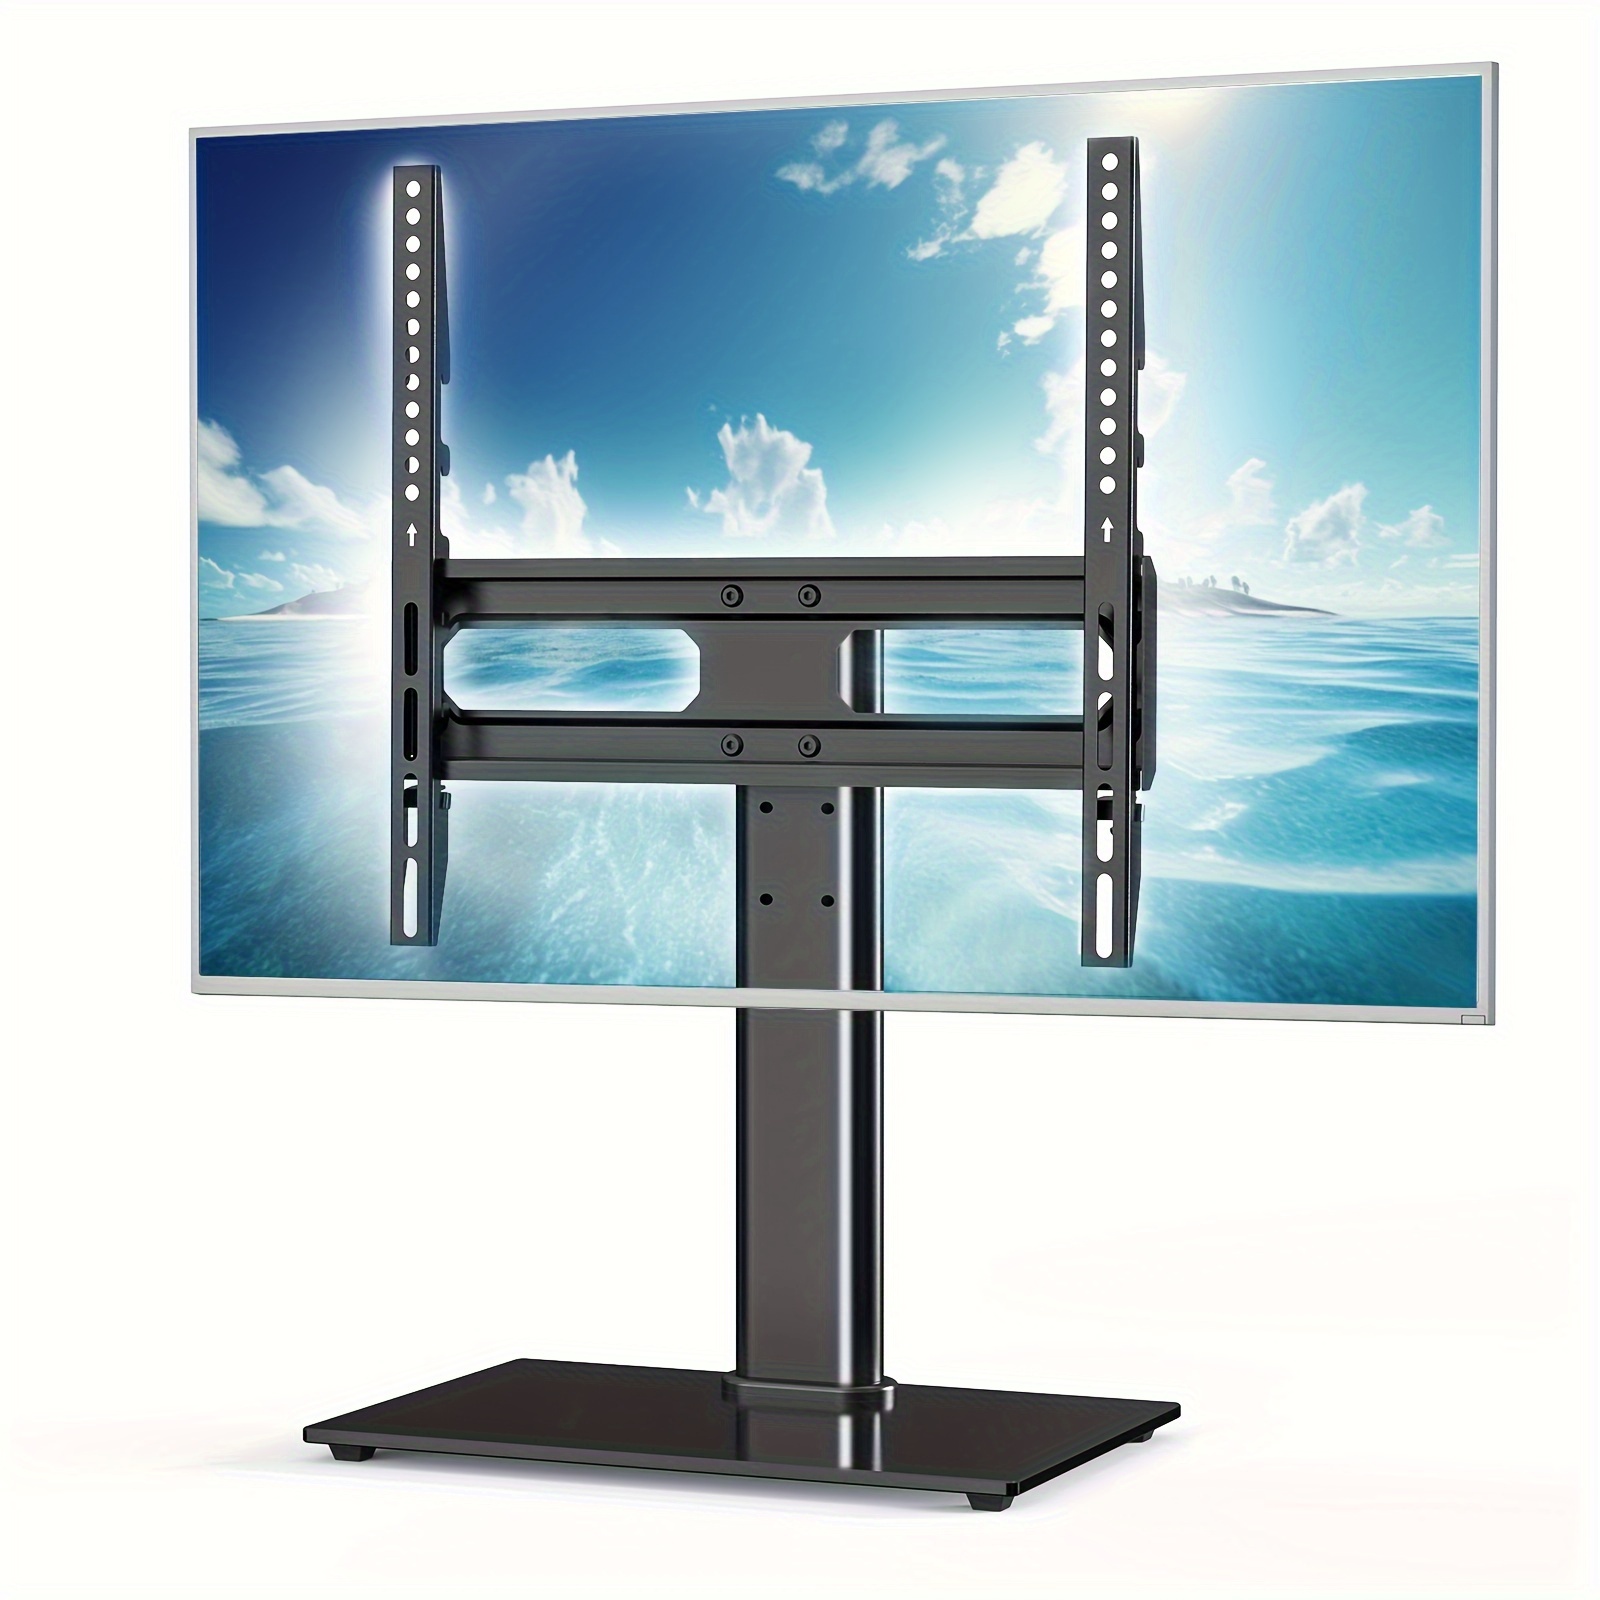 

Universal Tv Stand - 3 Height Adjustable Table Stand For 26-55 Inch Lcd Tv Base Stand With Tempered Glass Base, Vesa 400x400mm